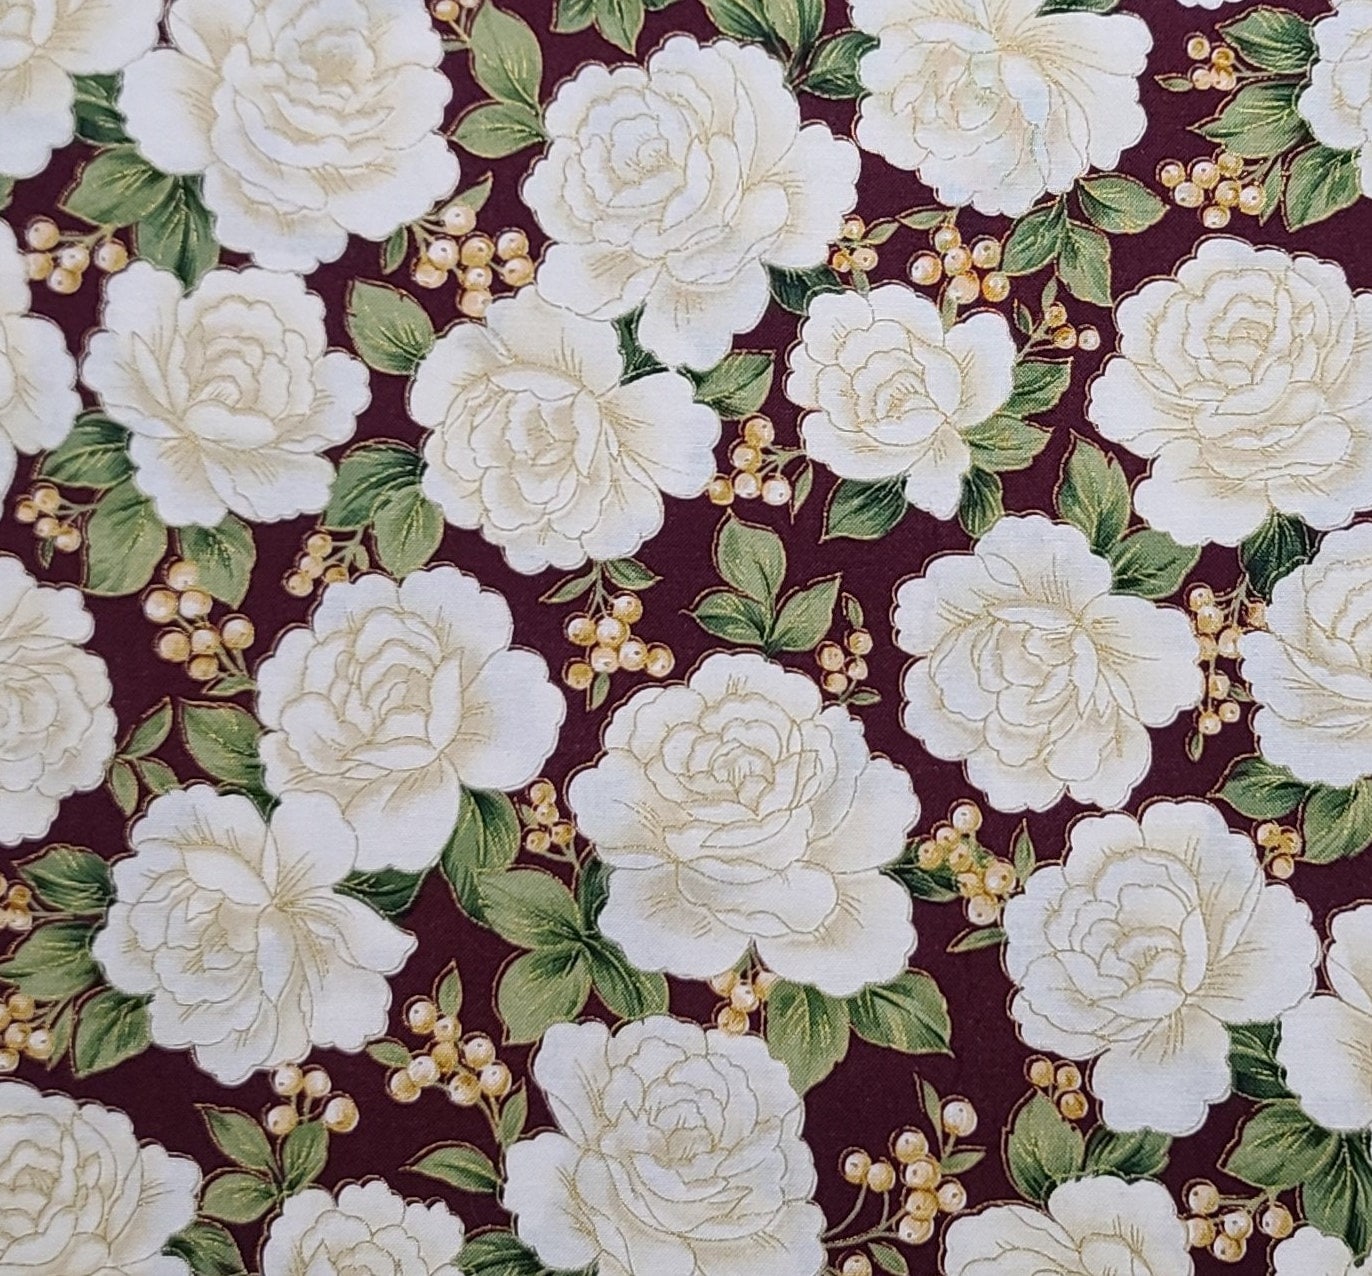 Timeless Treasures Fabrics Inc Joy-CM3328 - Burgundy Fabric / White and Gold Rose and Holly Berry Print / Gold Metallic Accents